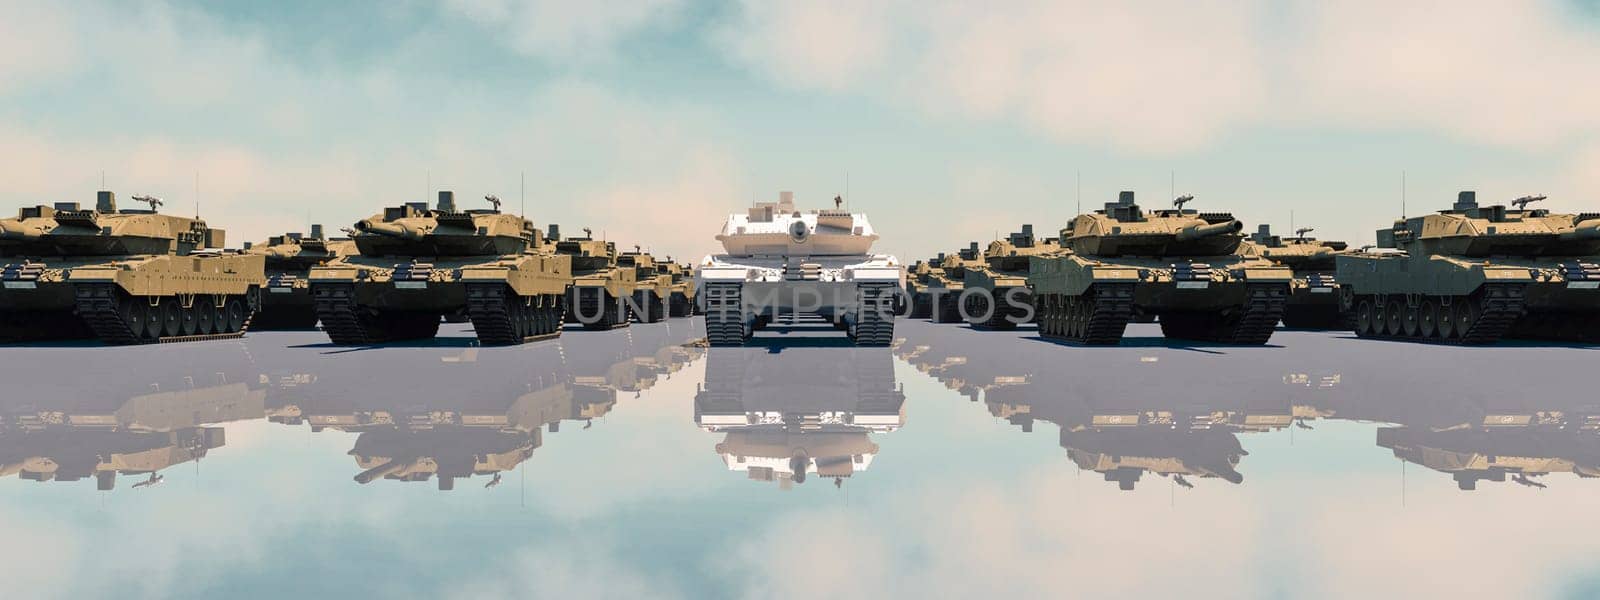 Show of Strength: Tanks in Formation Reflecting on a Flawless Surface by Juanjo39